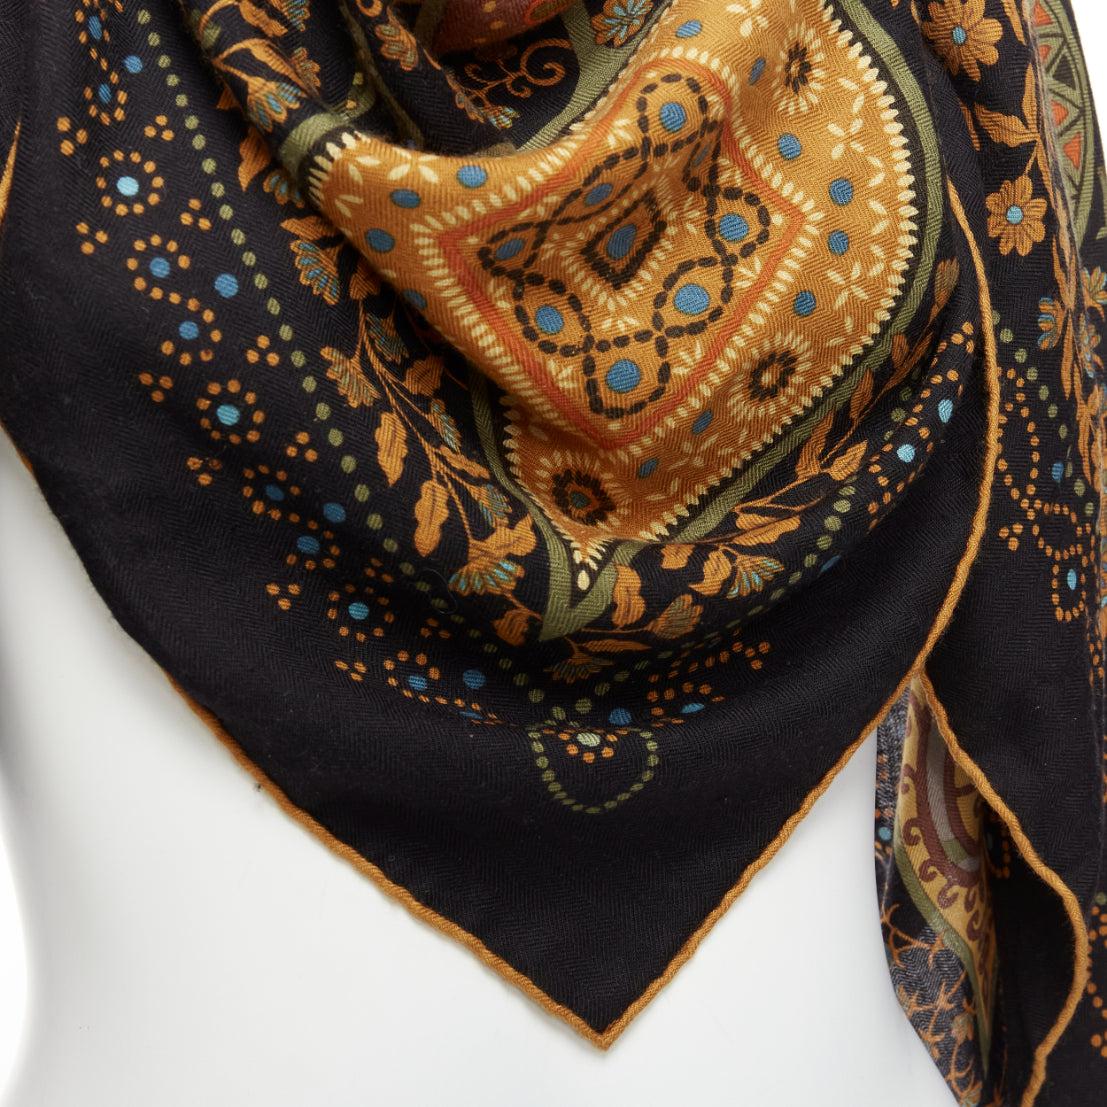 HERMES green brown cashmere silk ethnic garden floral print 135cm square scarf
Reference: AAWC/A01156
Brand: Hermes
Material: Cashmere, Silk
Color: Green, Brown
Pattern: Floral
Made in: France

CONDITION:
Condition: Excellent, this item was